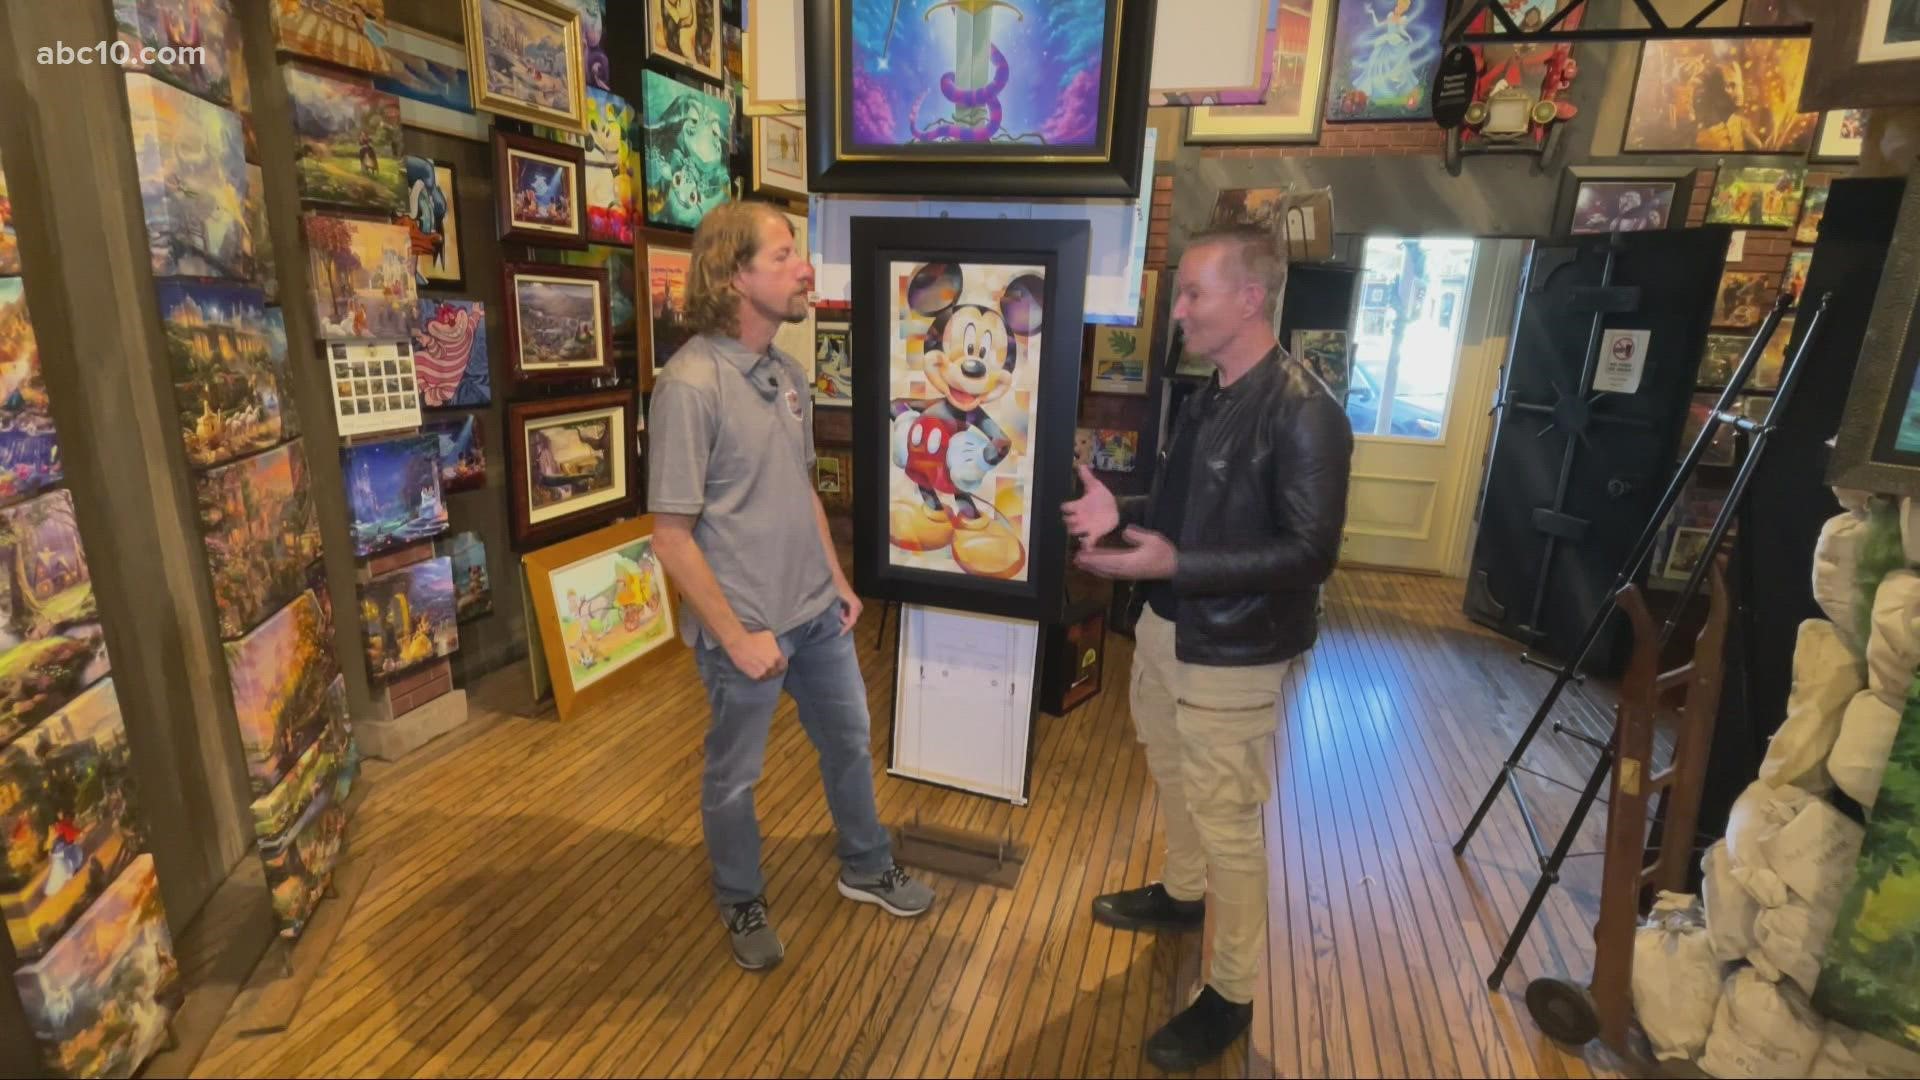 In celebration of Mickey Mouse's 93rd birthday, our Mark S. Allen went down to Old Sacramento to tour The Vault at Stage 9, a treasure trove of Disney memories.